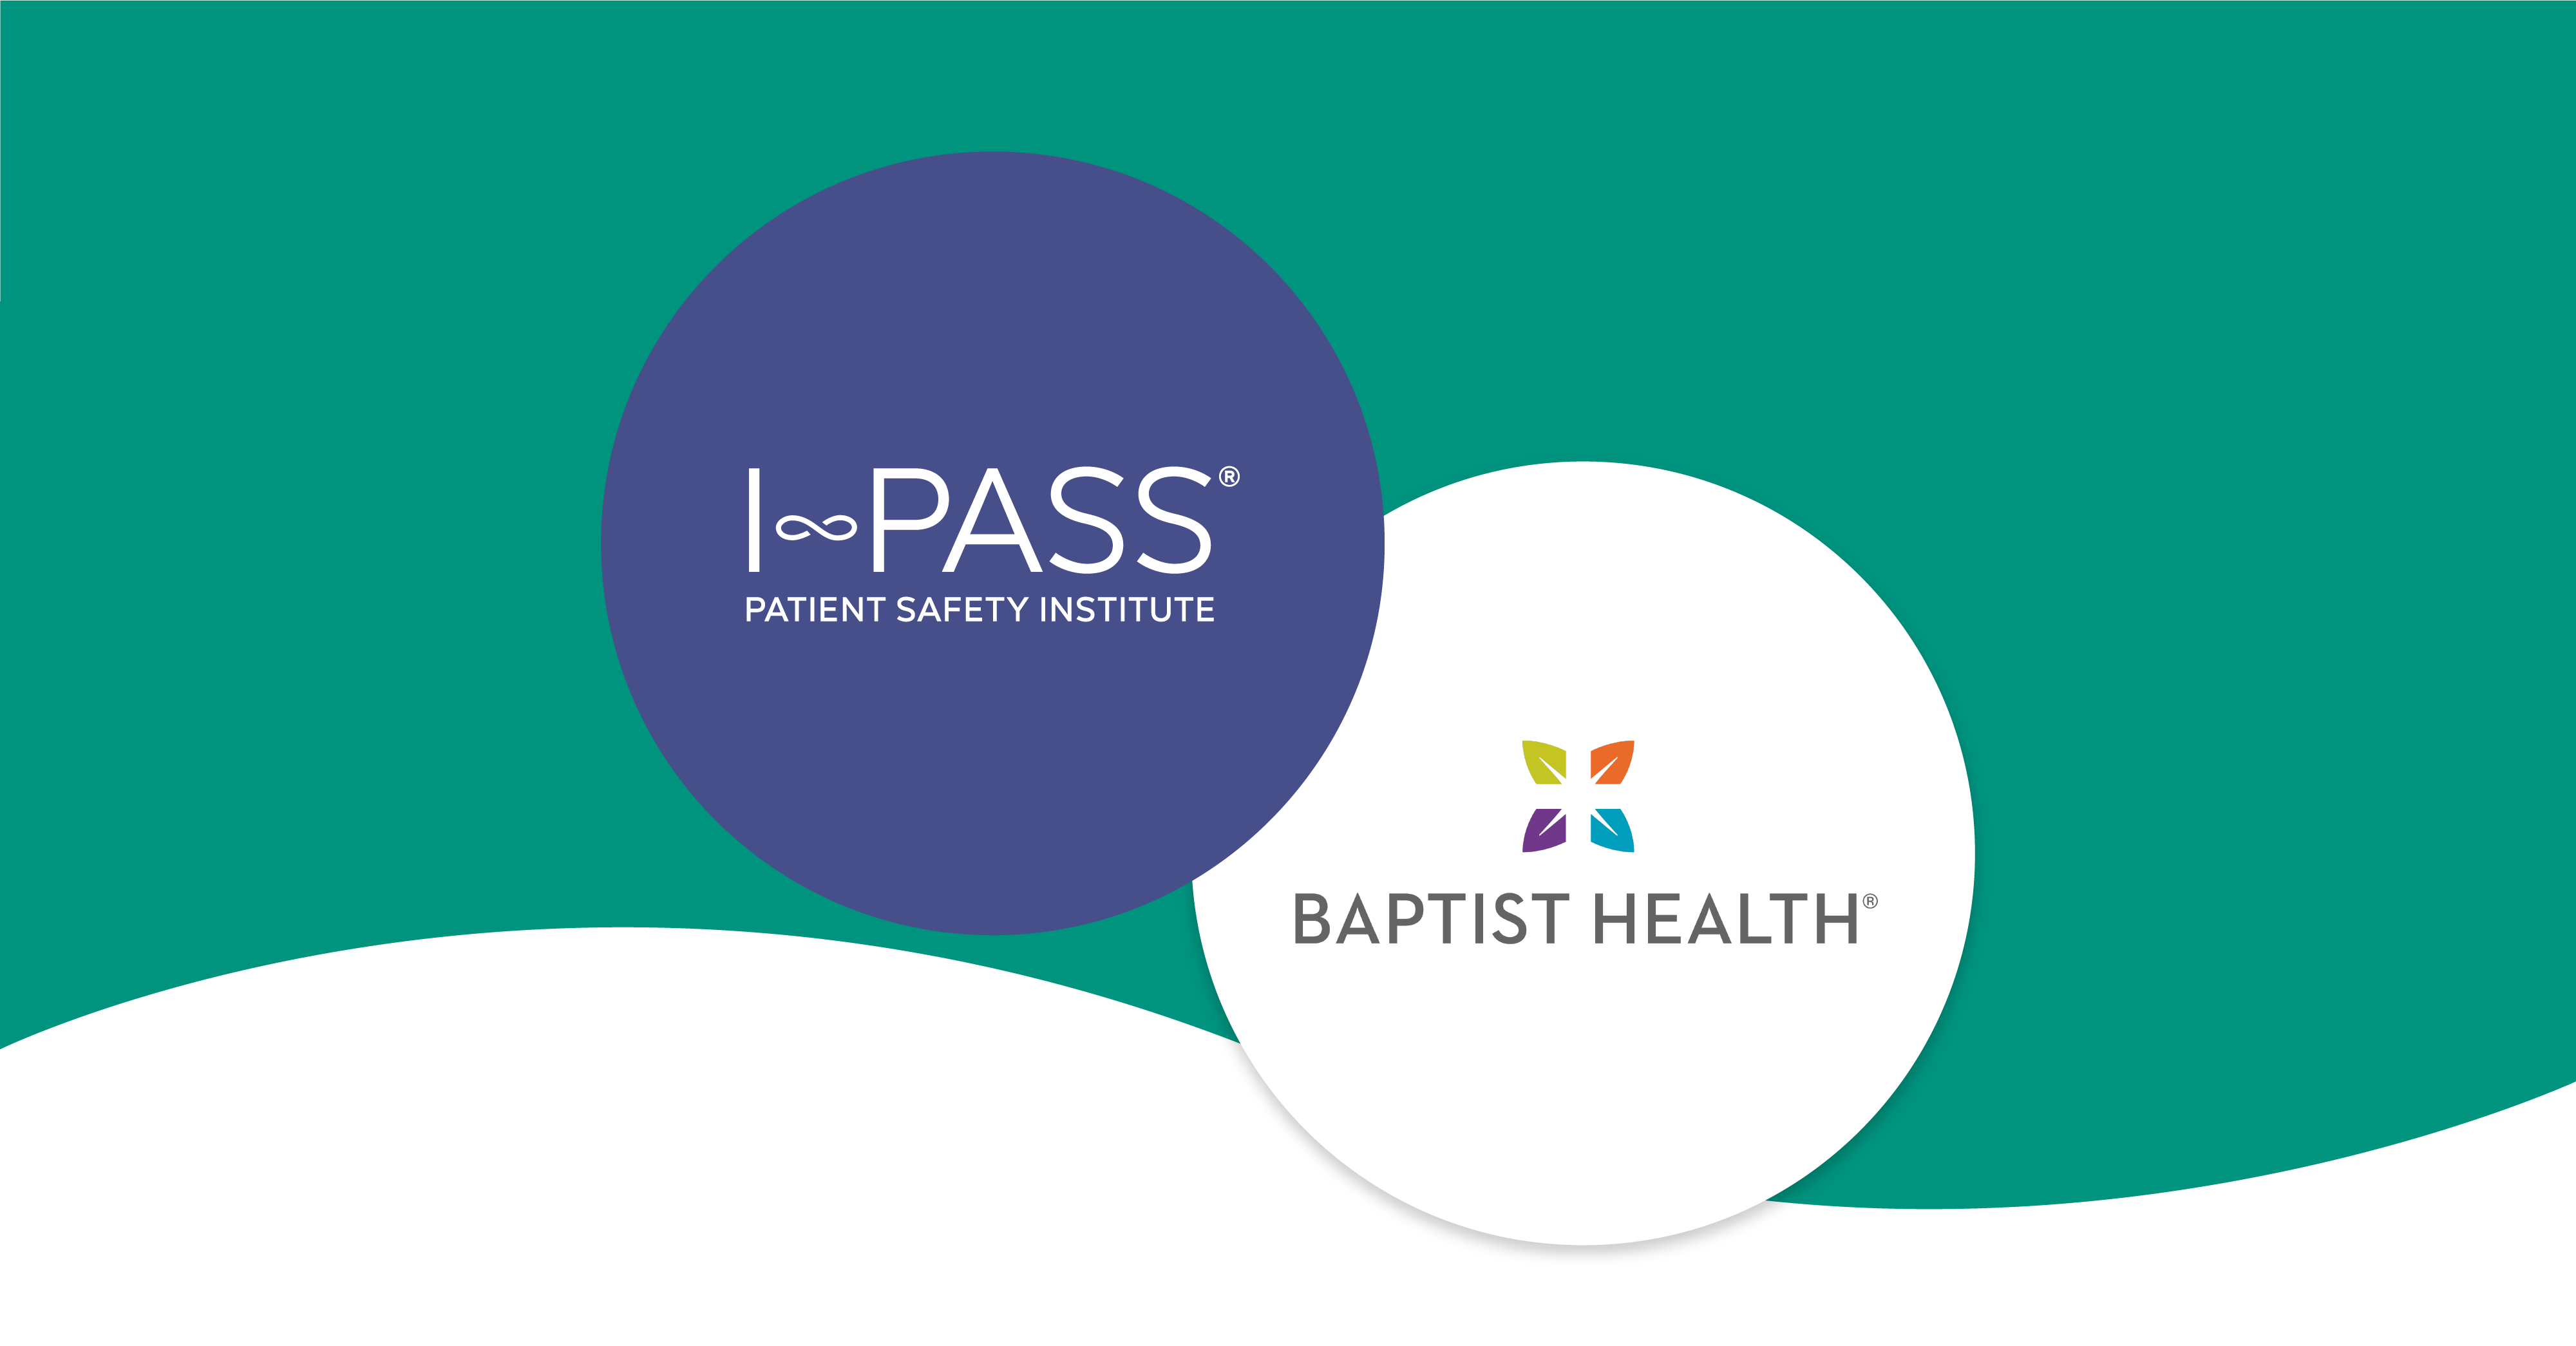 Kentucky-Based Baptist Health System Adopts I-PASS Structured Handoff Communication Tools to Improve Patient Safety